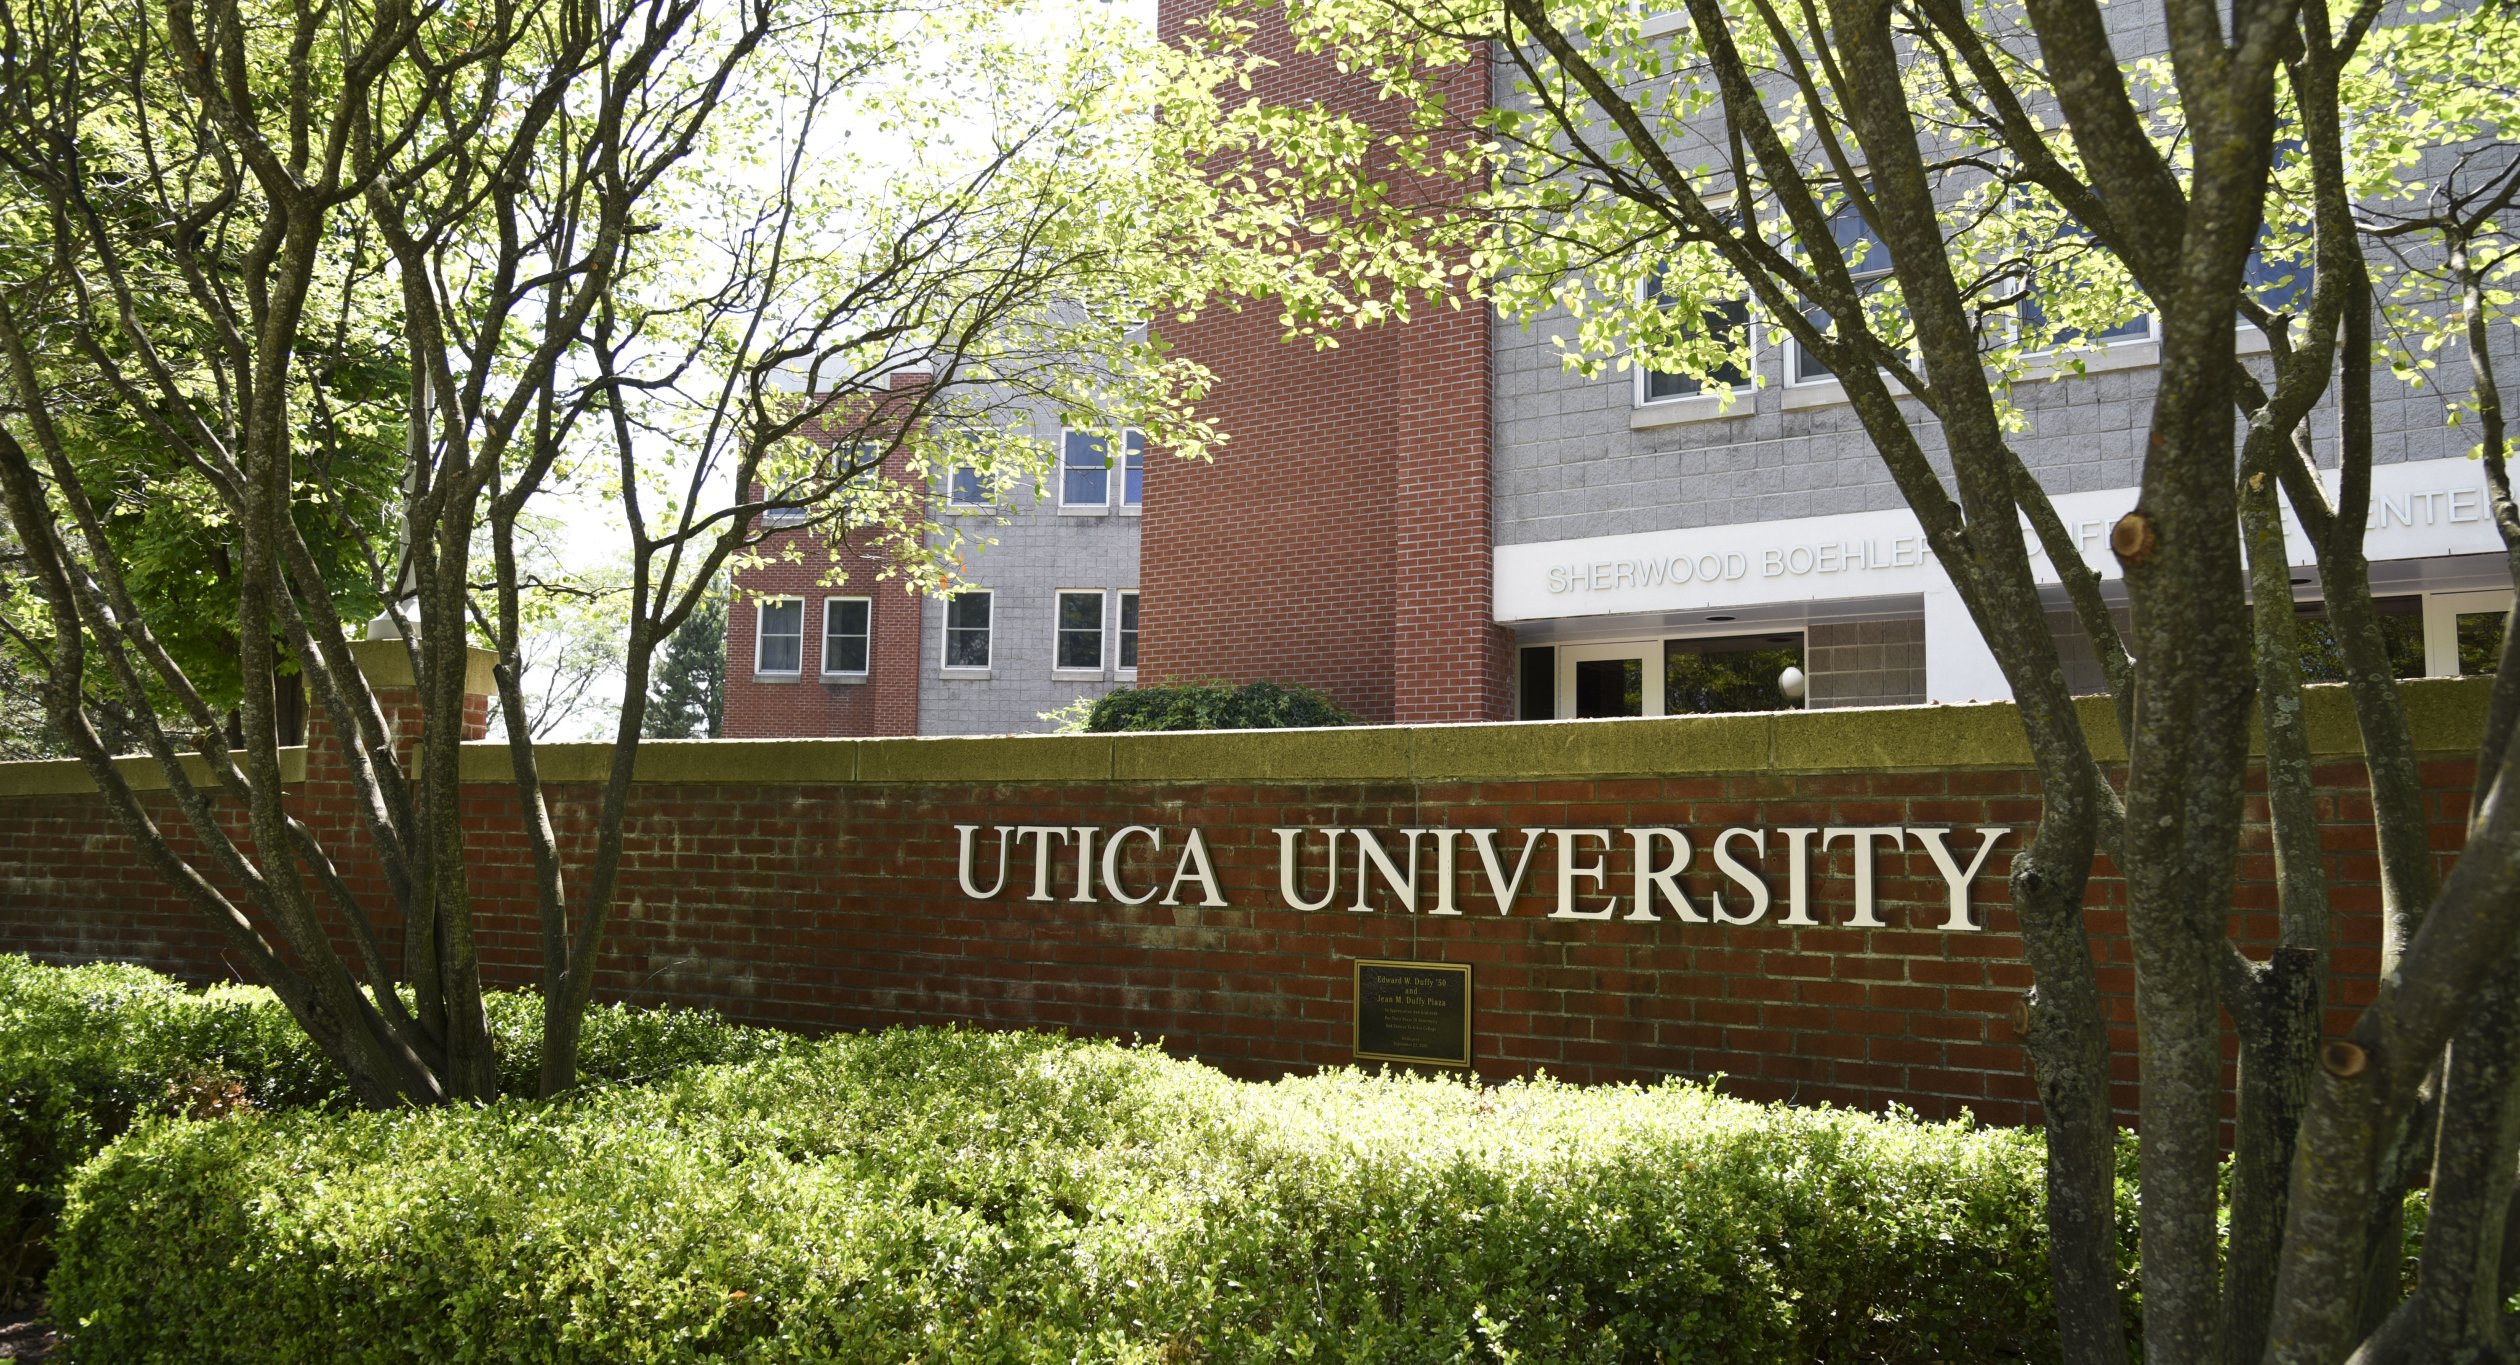 The words Utica University against a brick wall in front of a residence hall.